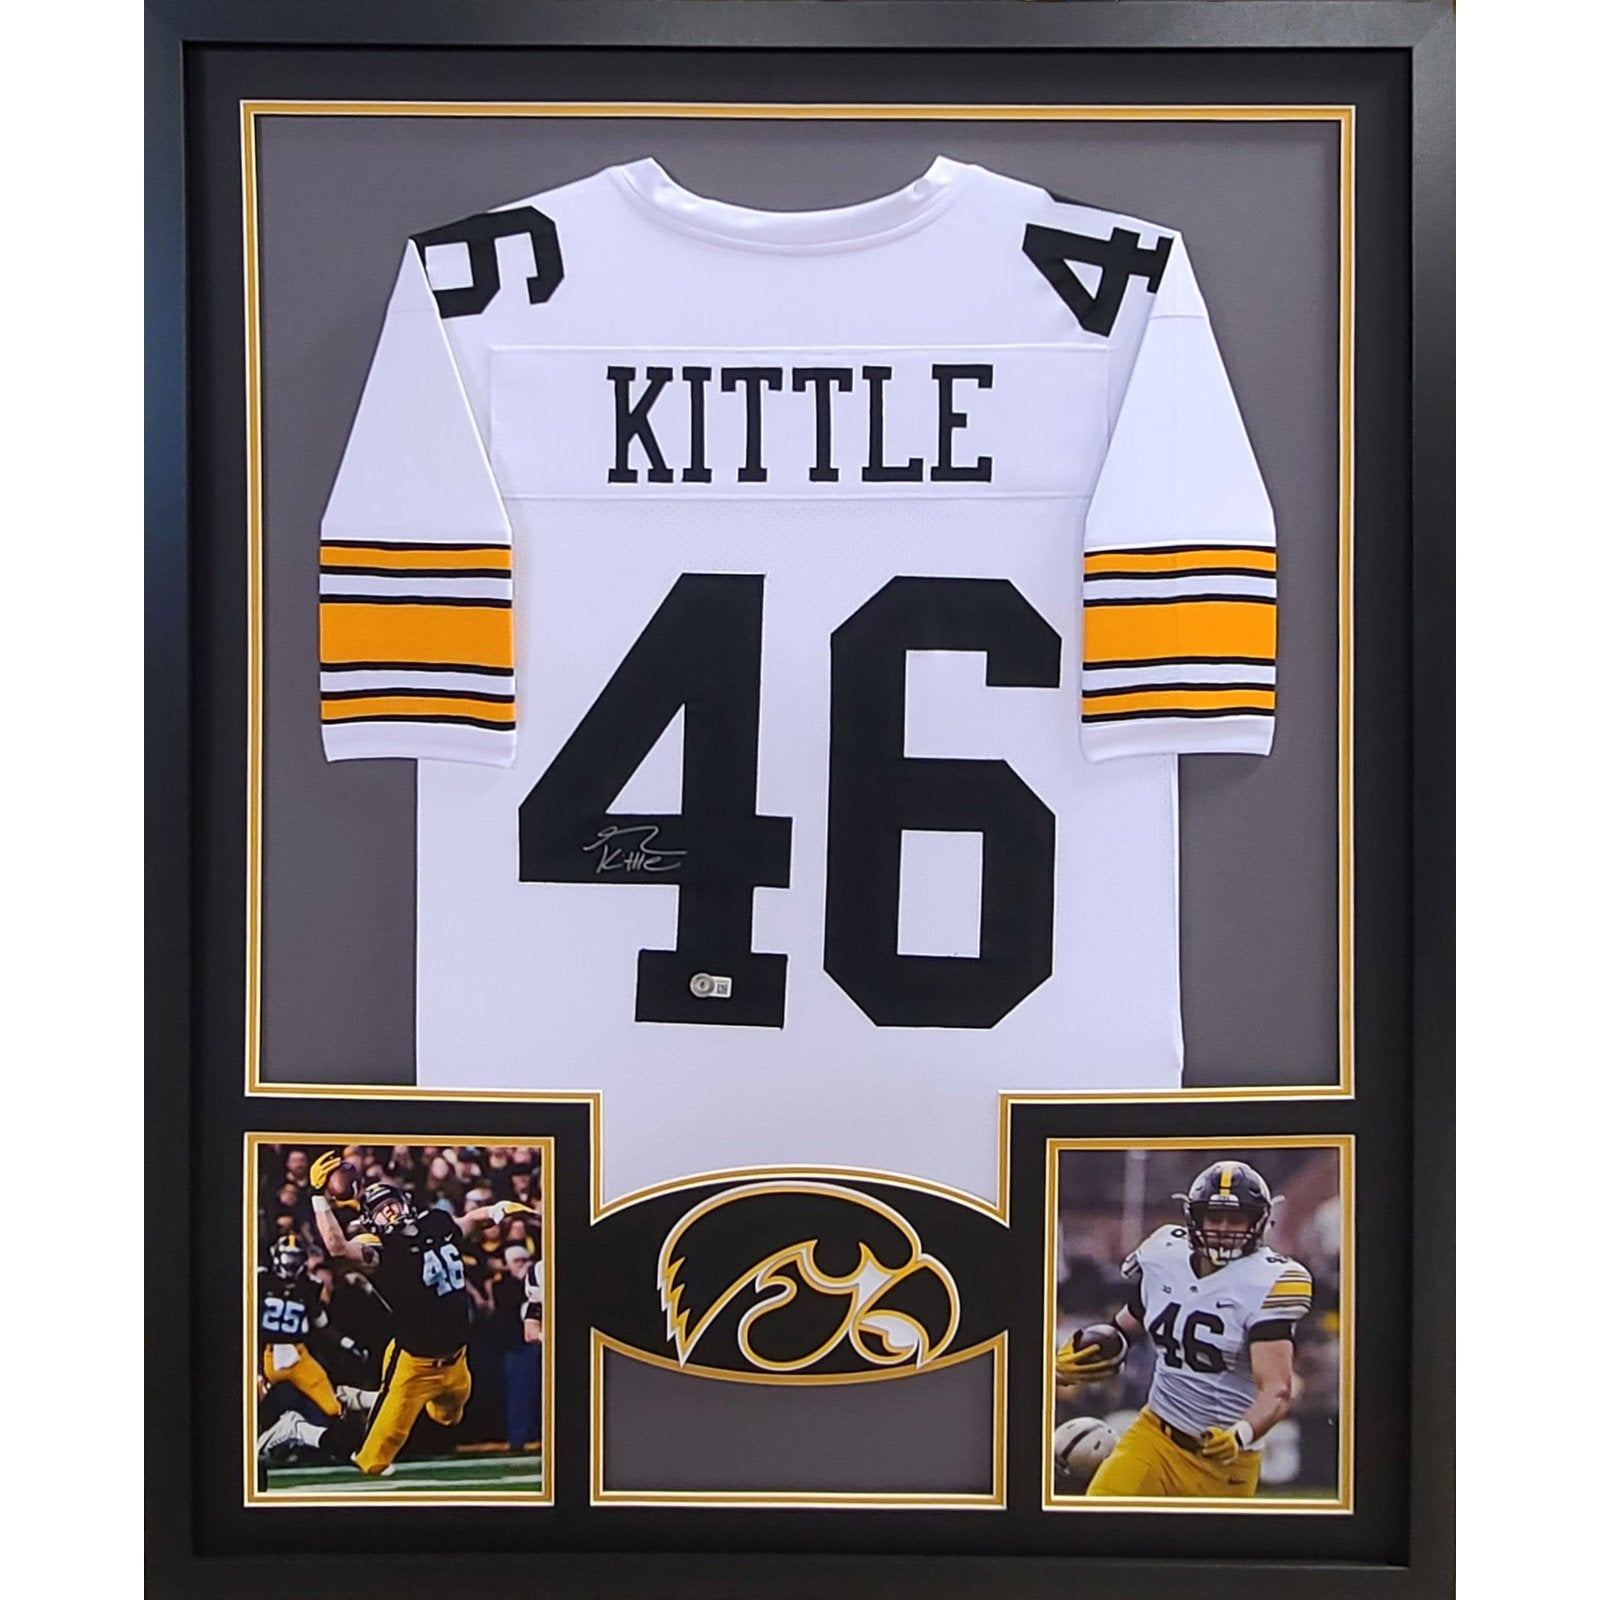 George Kittle Framed Signed Jersey Beckett Autographed Iowa Hawkeyes 49ers